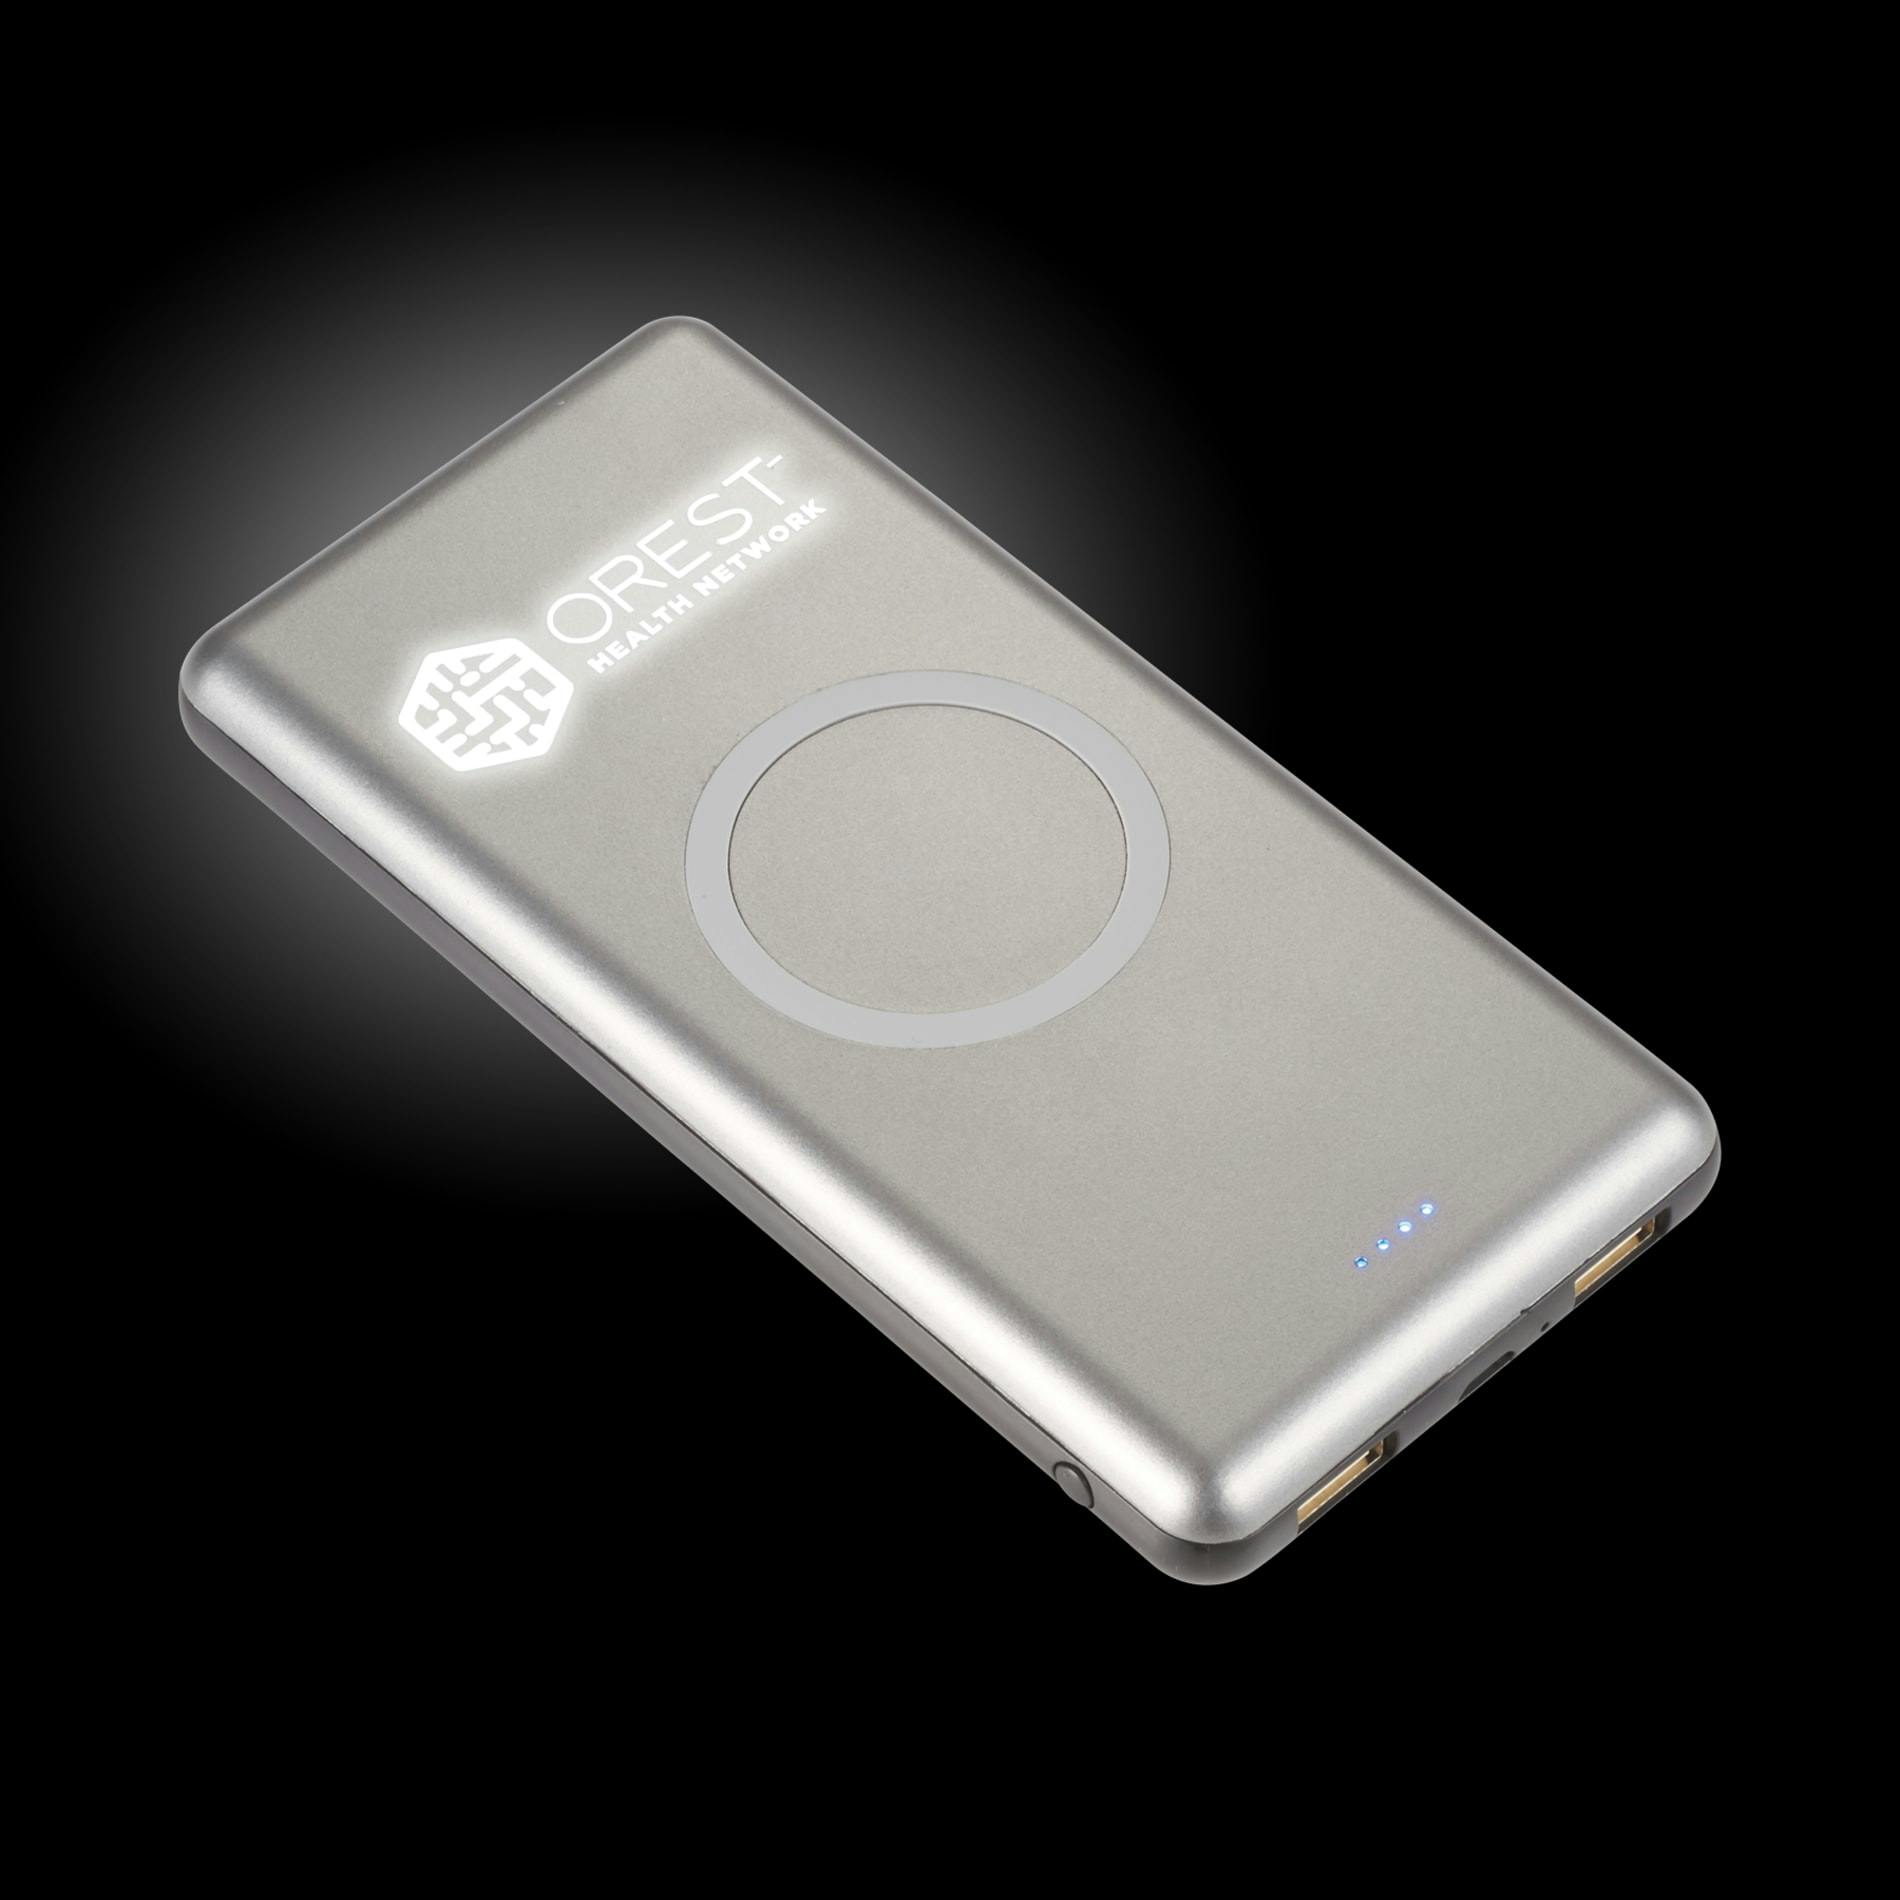 UL Listed Light Up Qi 10000 Wireless Power Bank - additional Image 3